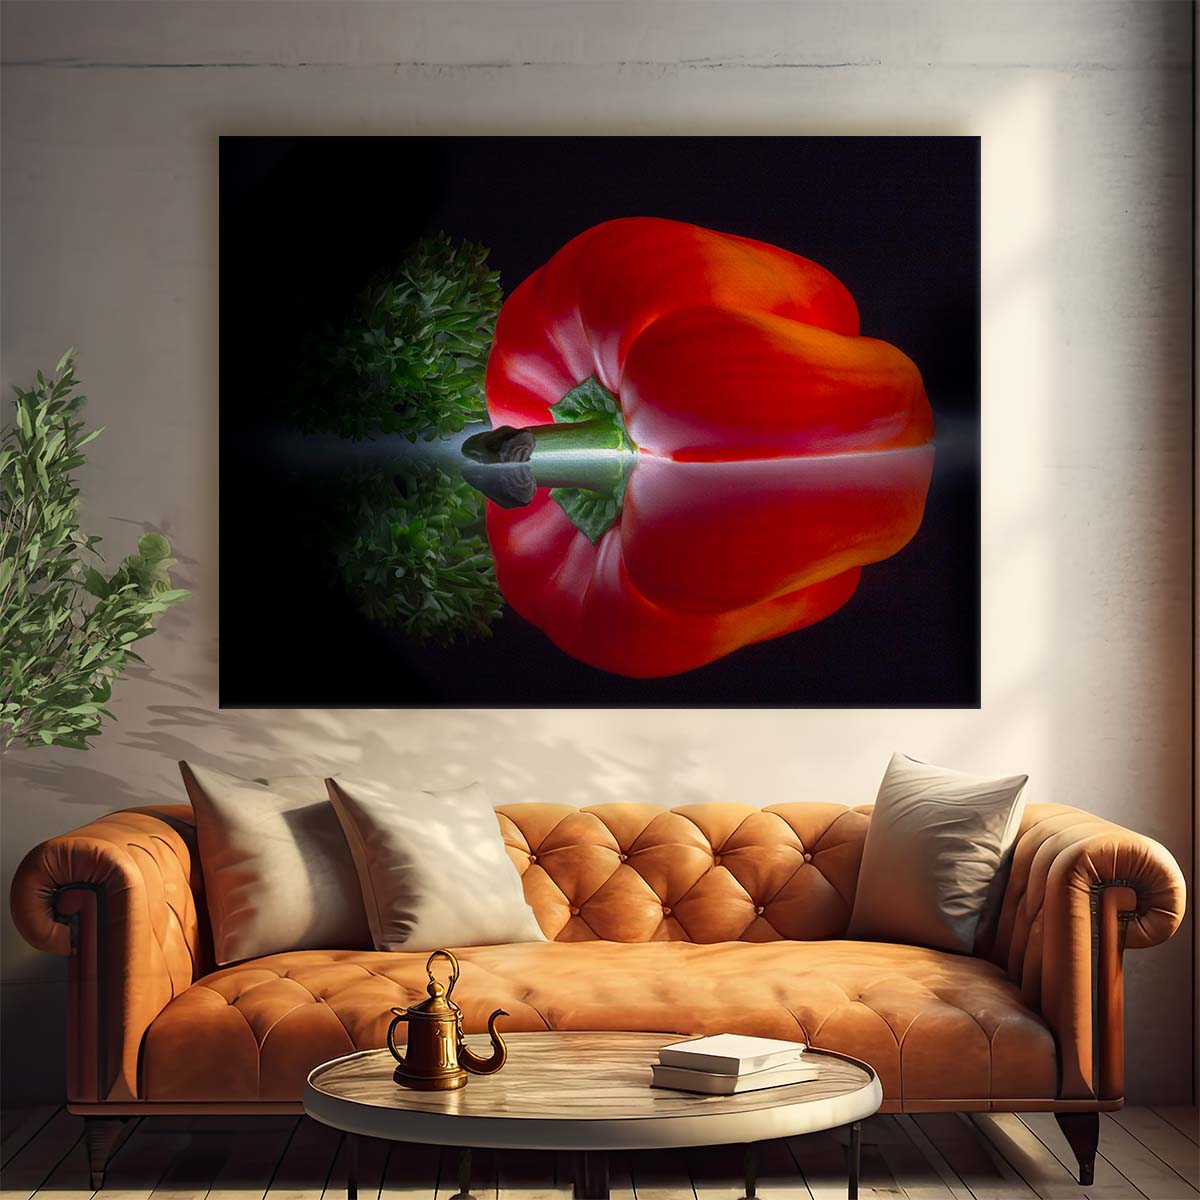 Red Paprika Reflection Kitchen Art Vegetarian Wall Art by Luxuriance Designs. Made in USA.